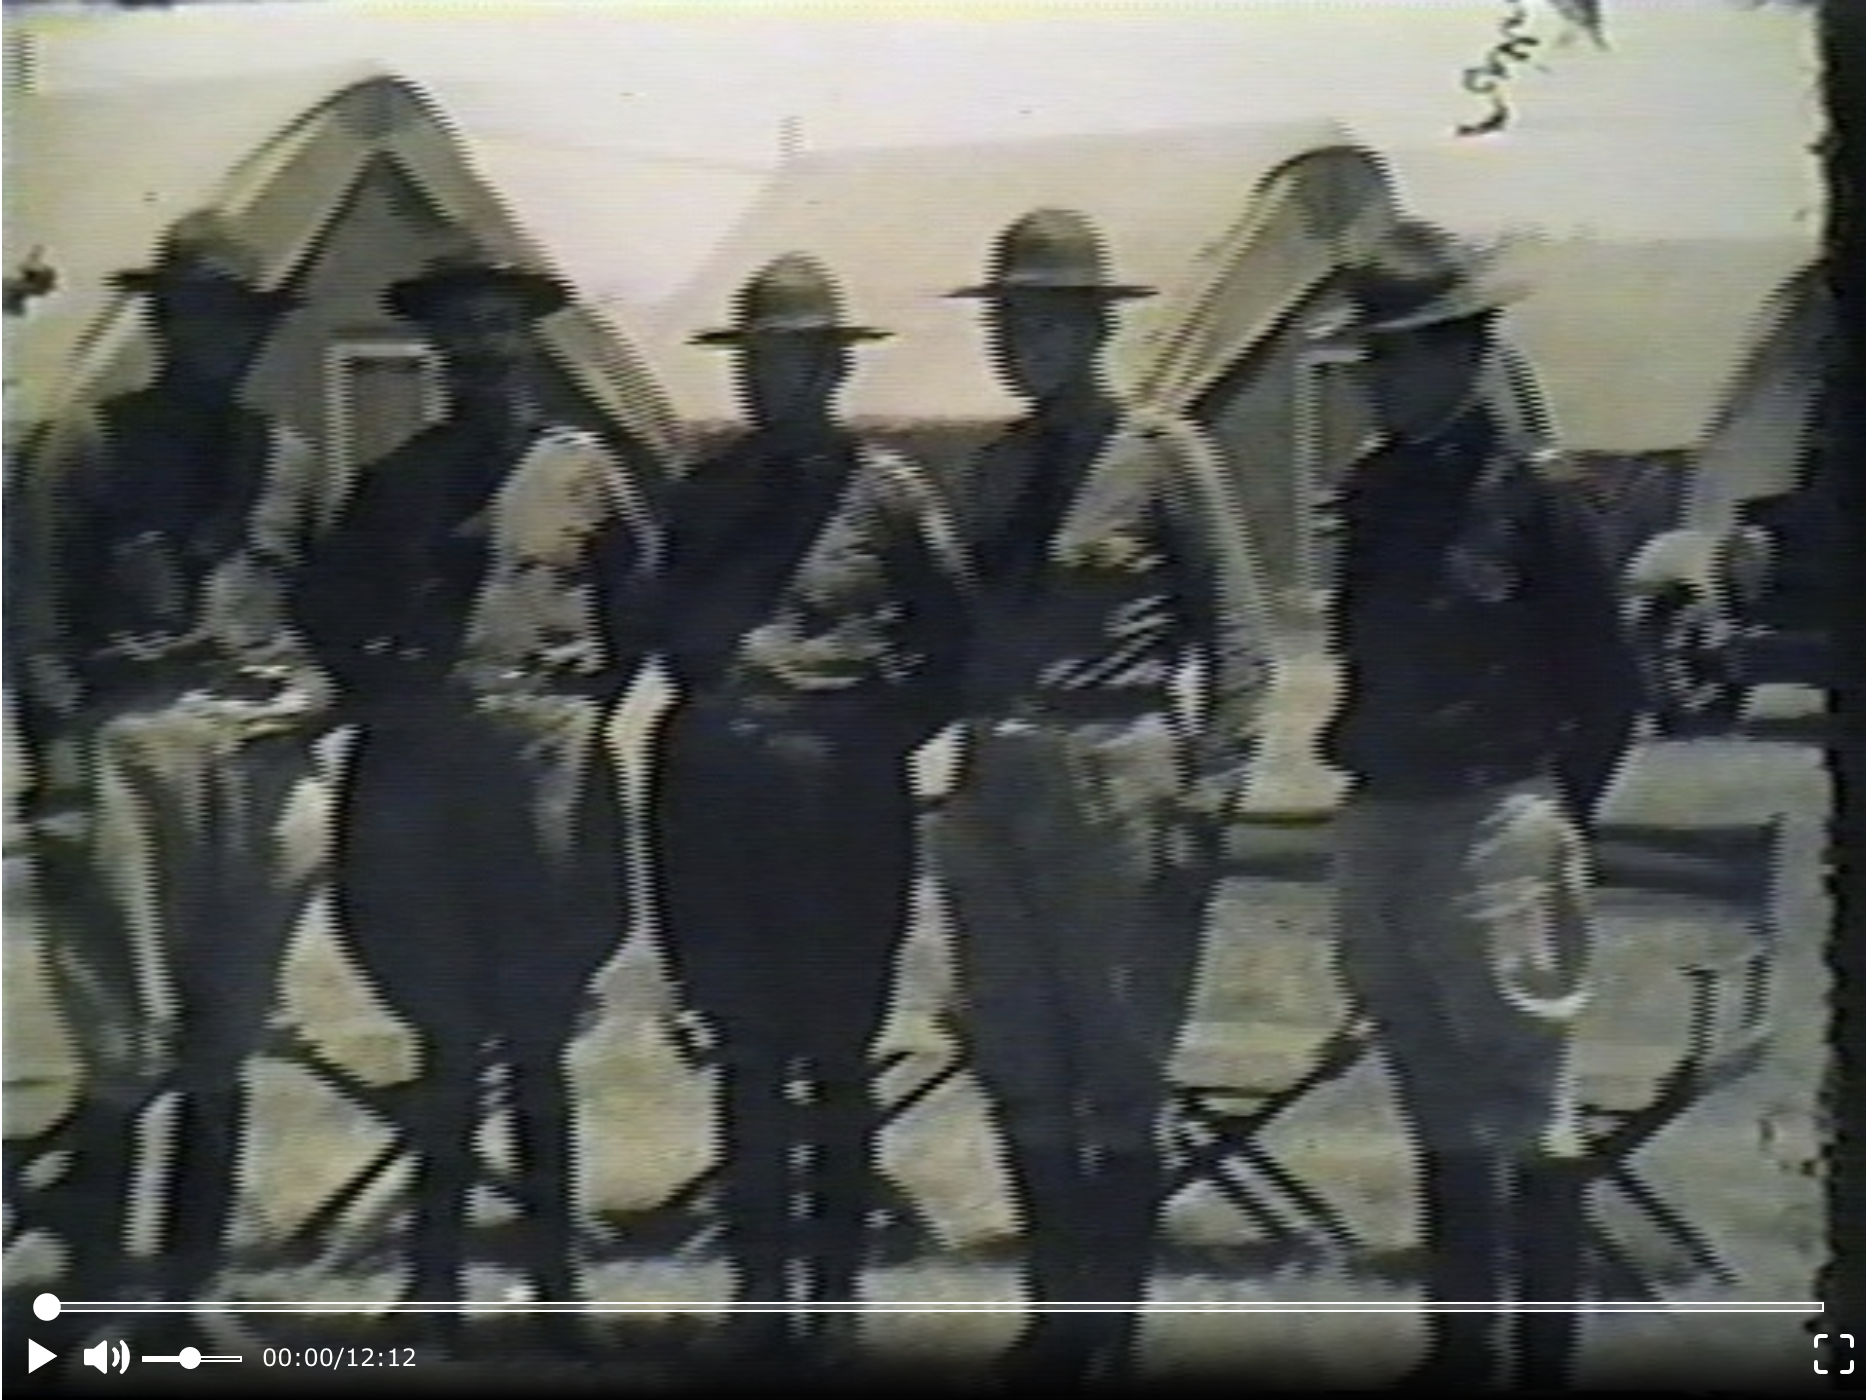 CLICK TO WATCH VIDEO - COURTESY BELL COUNTY MUSEUM